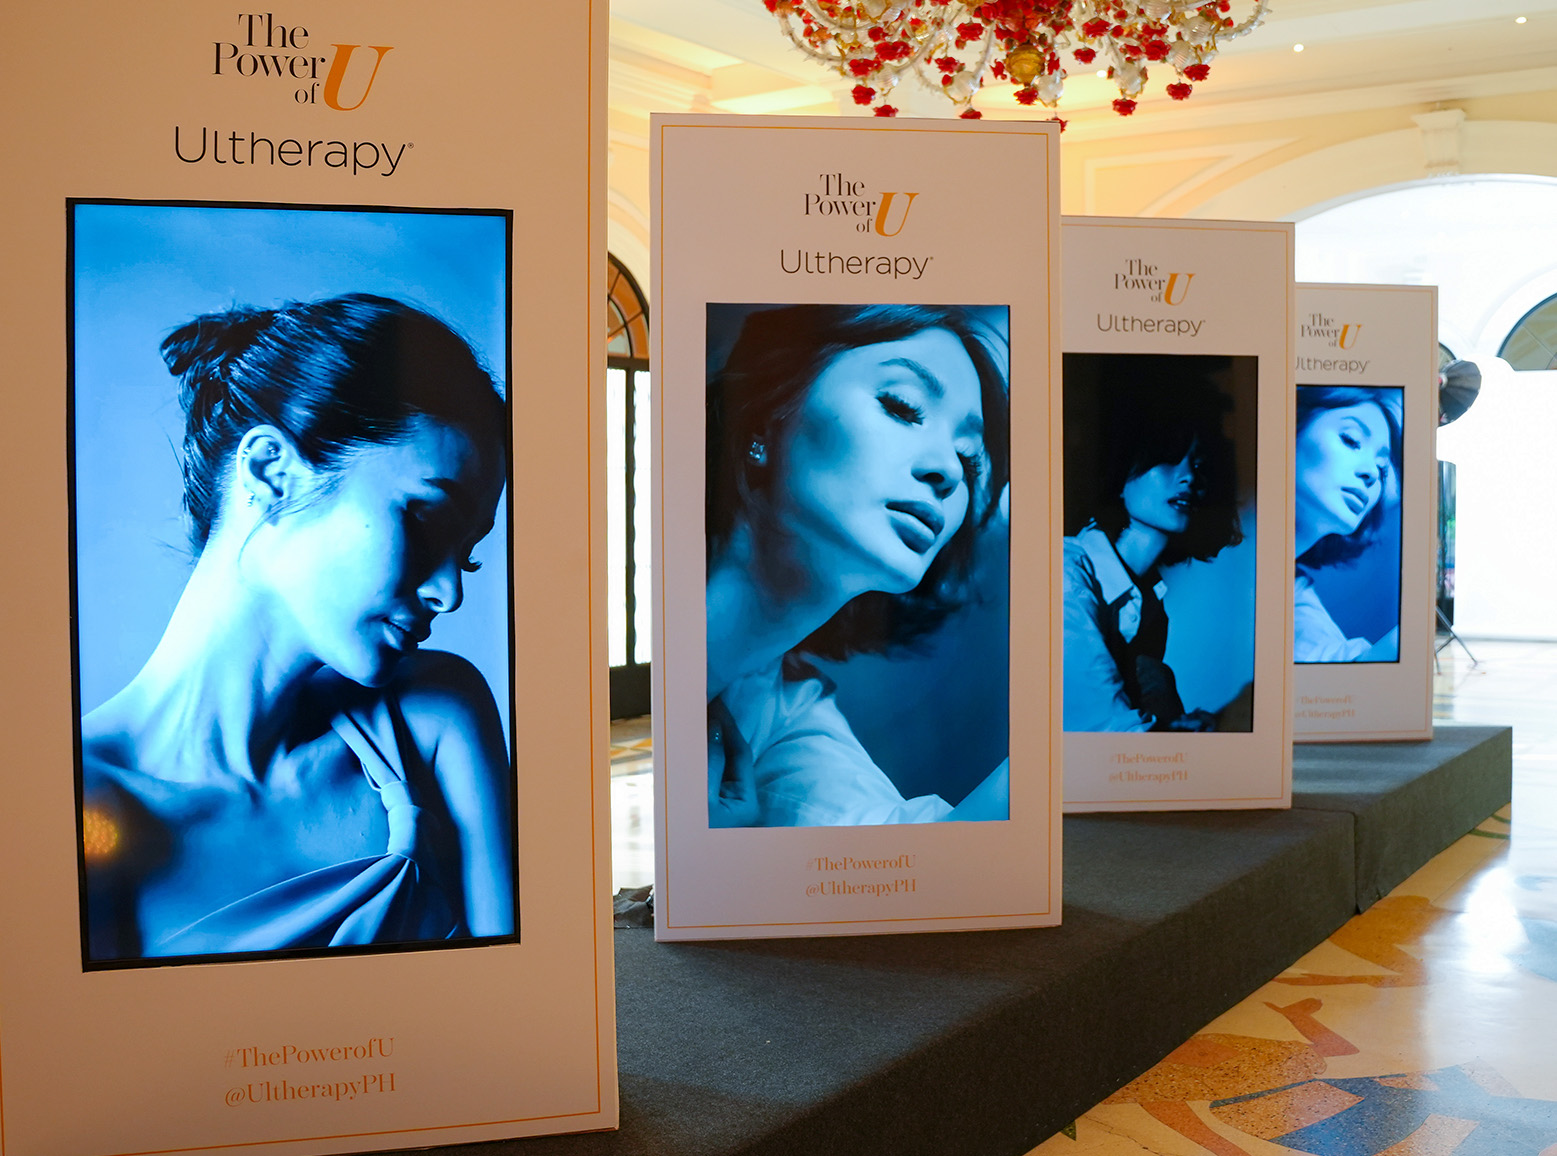 An exhibit of Heart Evangelista as the face of Ultherapy®'s "The Power of U" campaign.